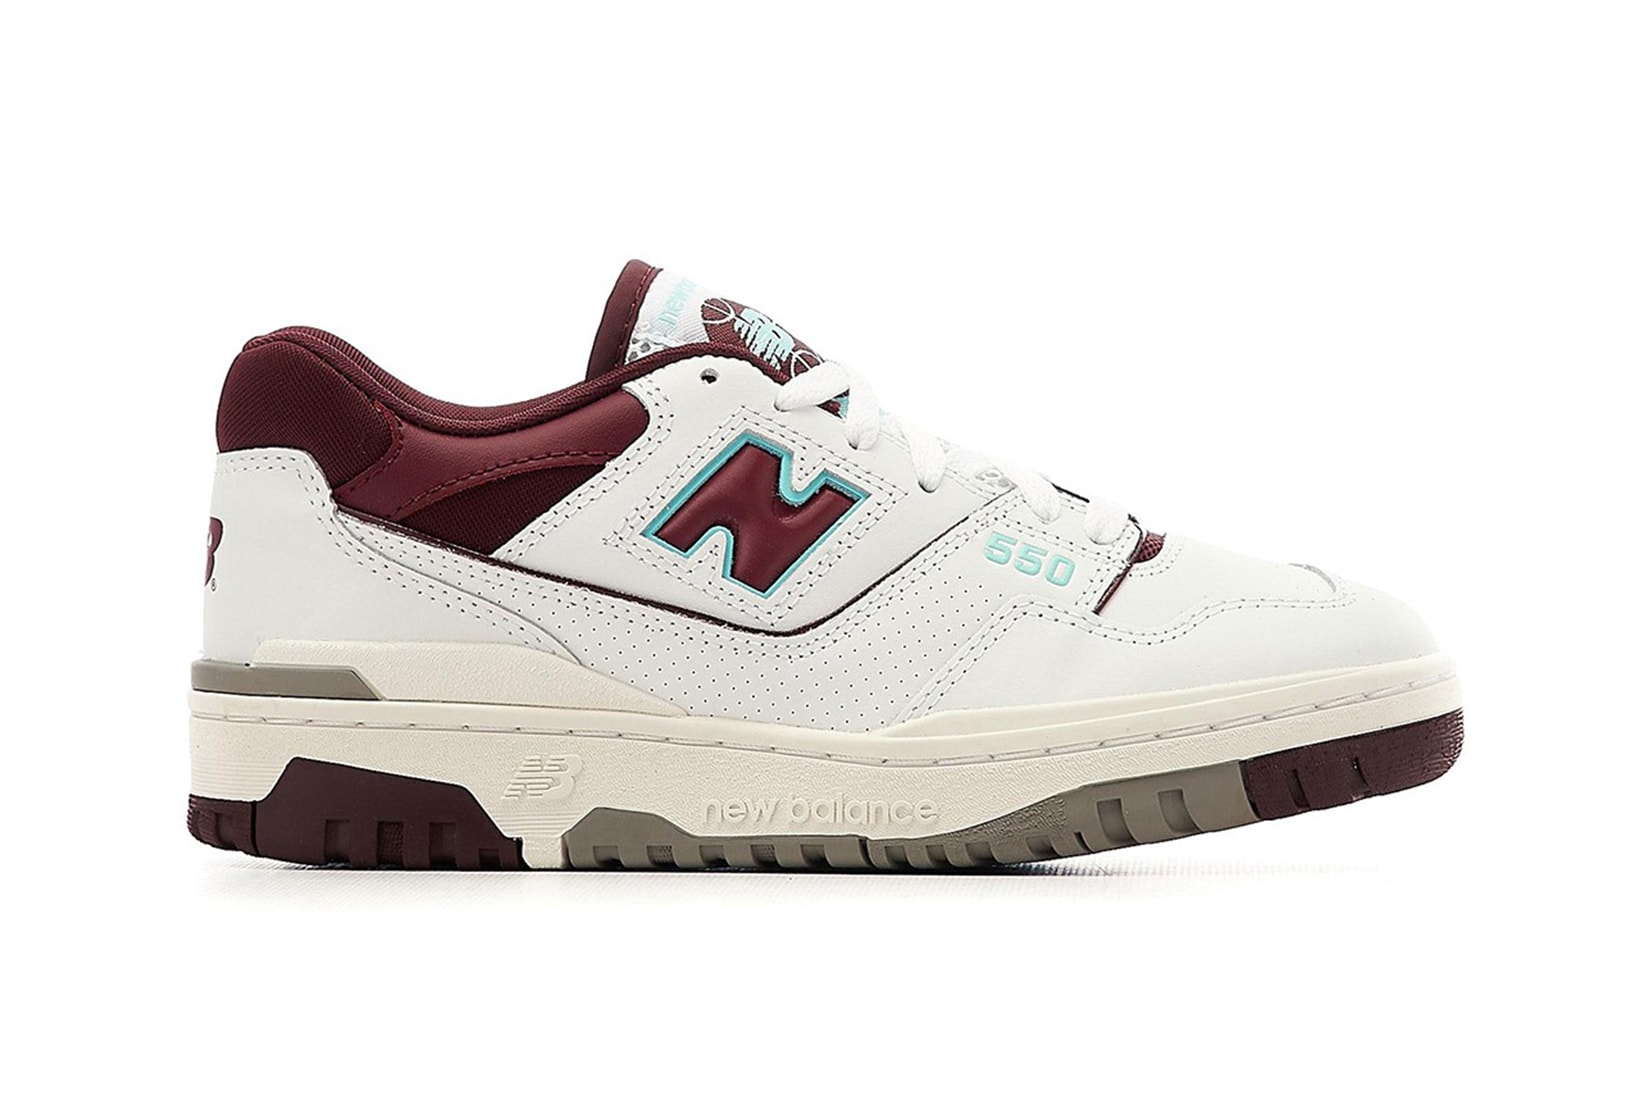 New balance 550 Sneakers Burgundy Blue Medial View